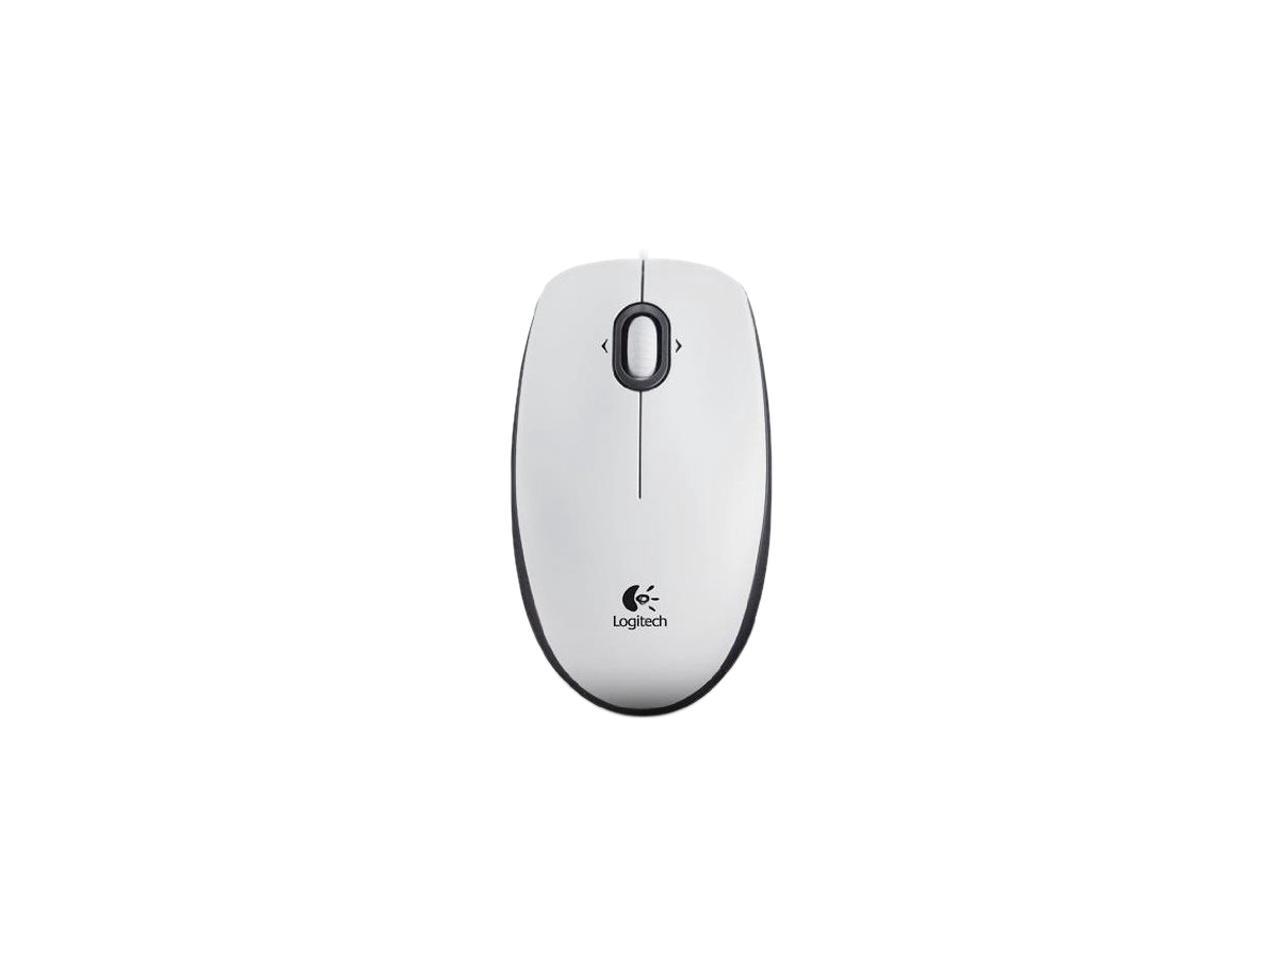 B100 OPTICAL MOUSE FOR BUSINESS